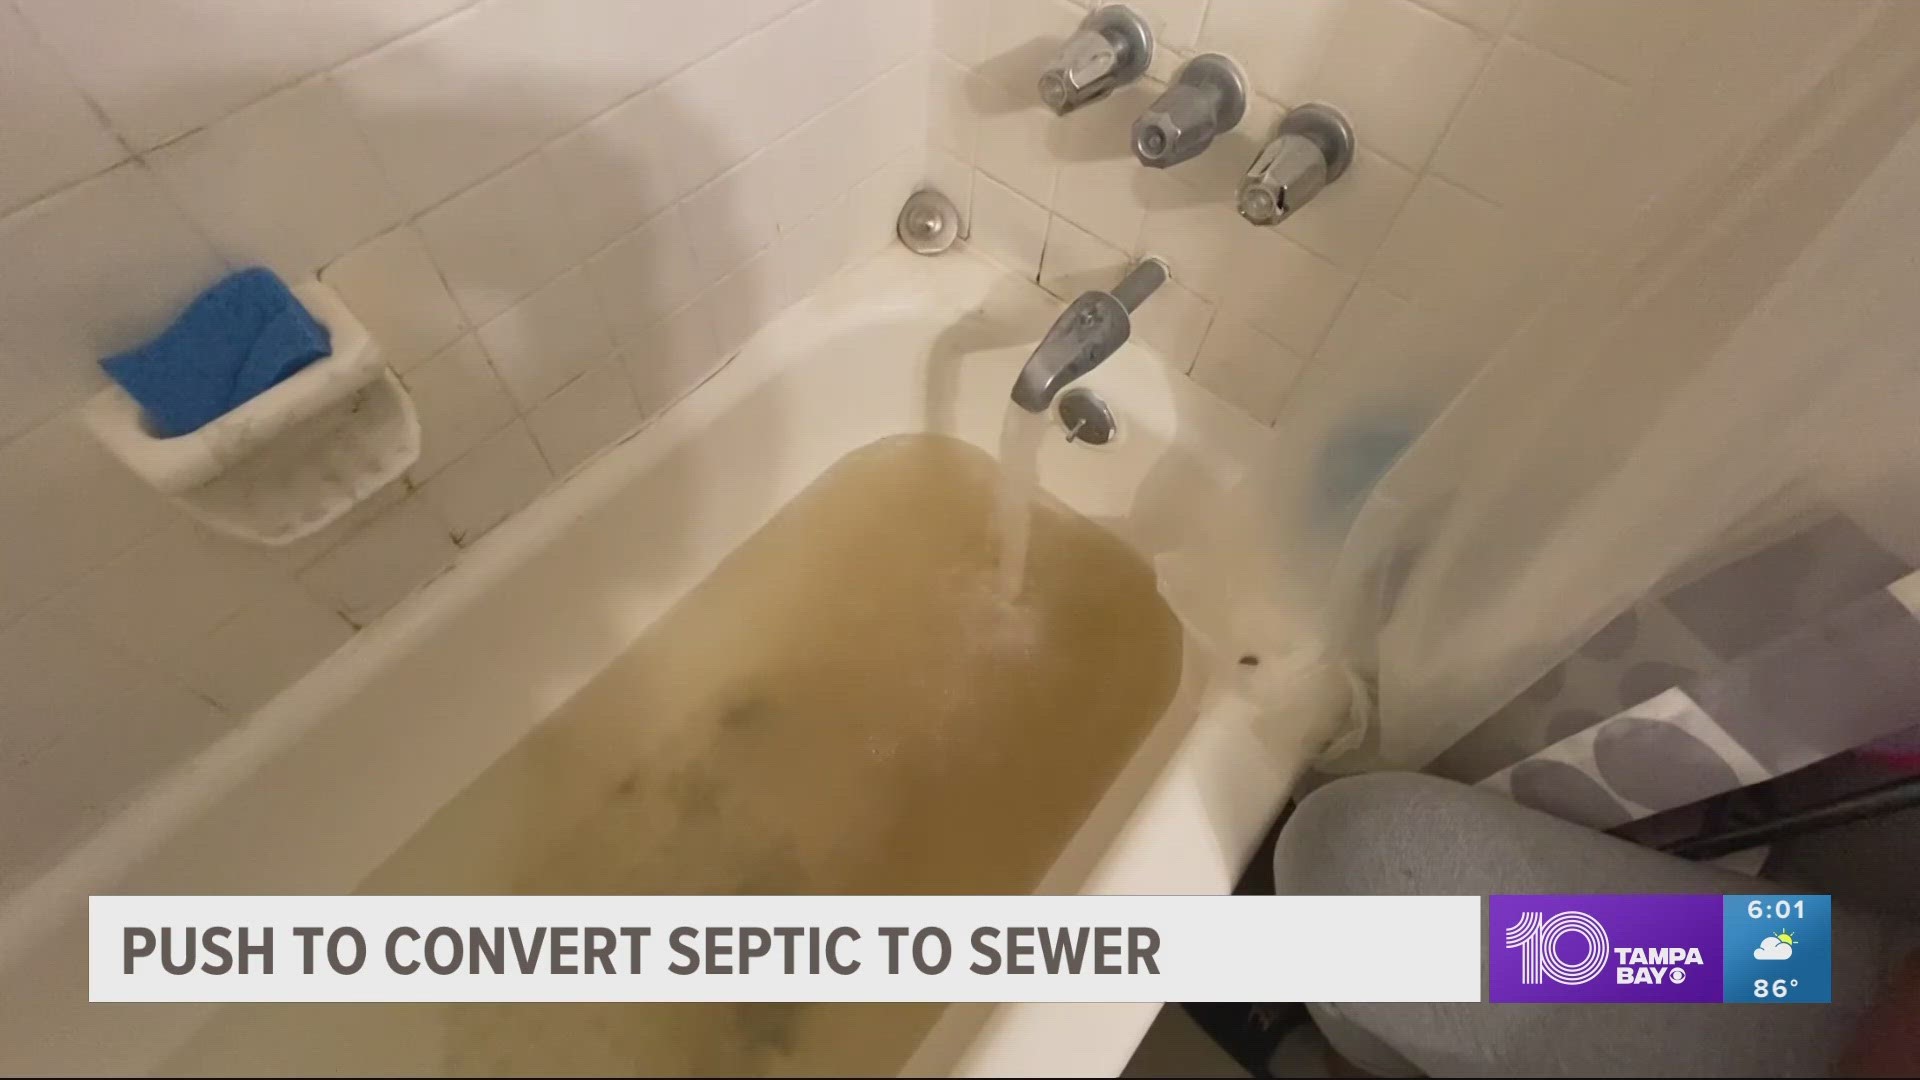 Many of the homes rely on septic tanks and private wells that might have been contaminated.